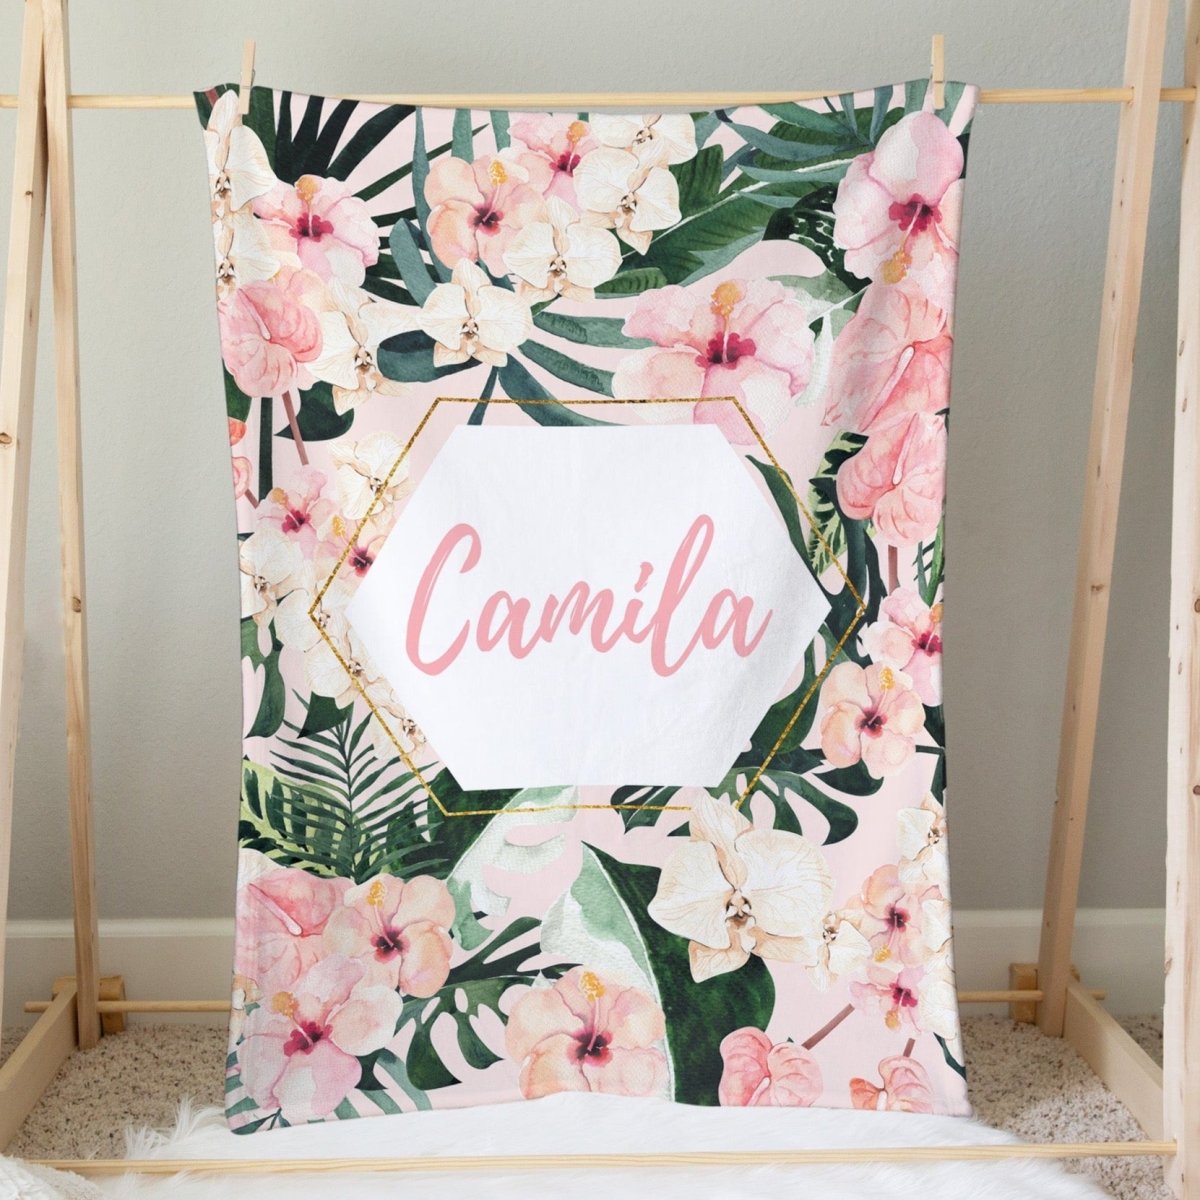 Tropical Floral Personalized Minky Blanket - gender_girl, Personalized_Yes, text